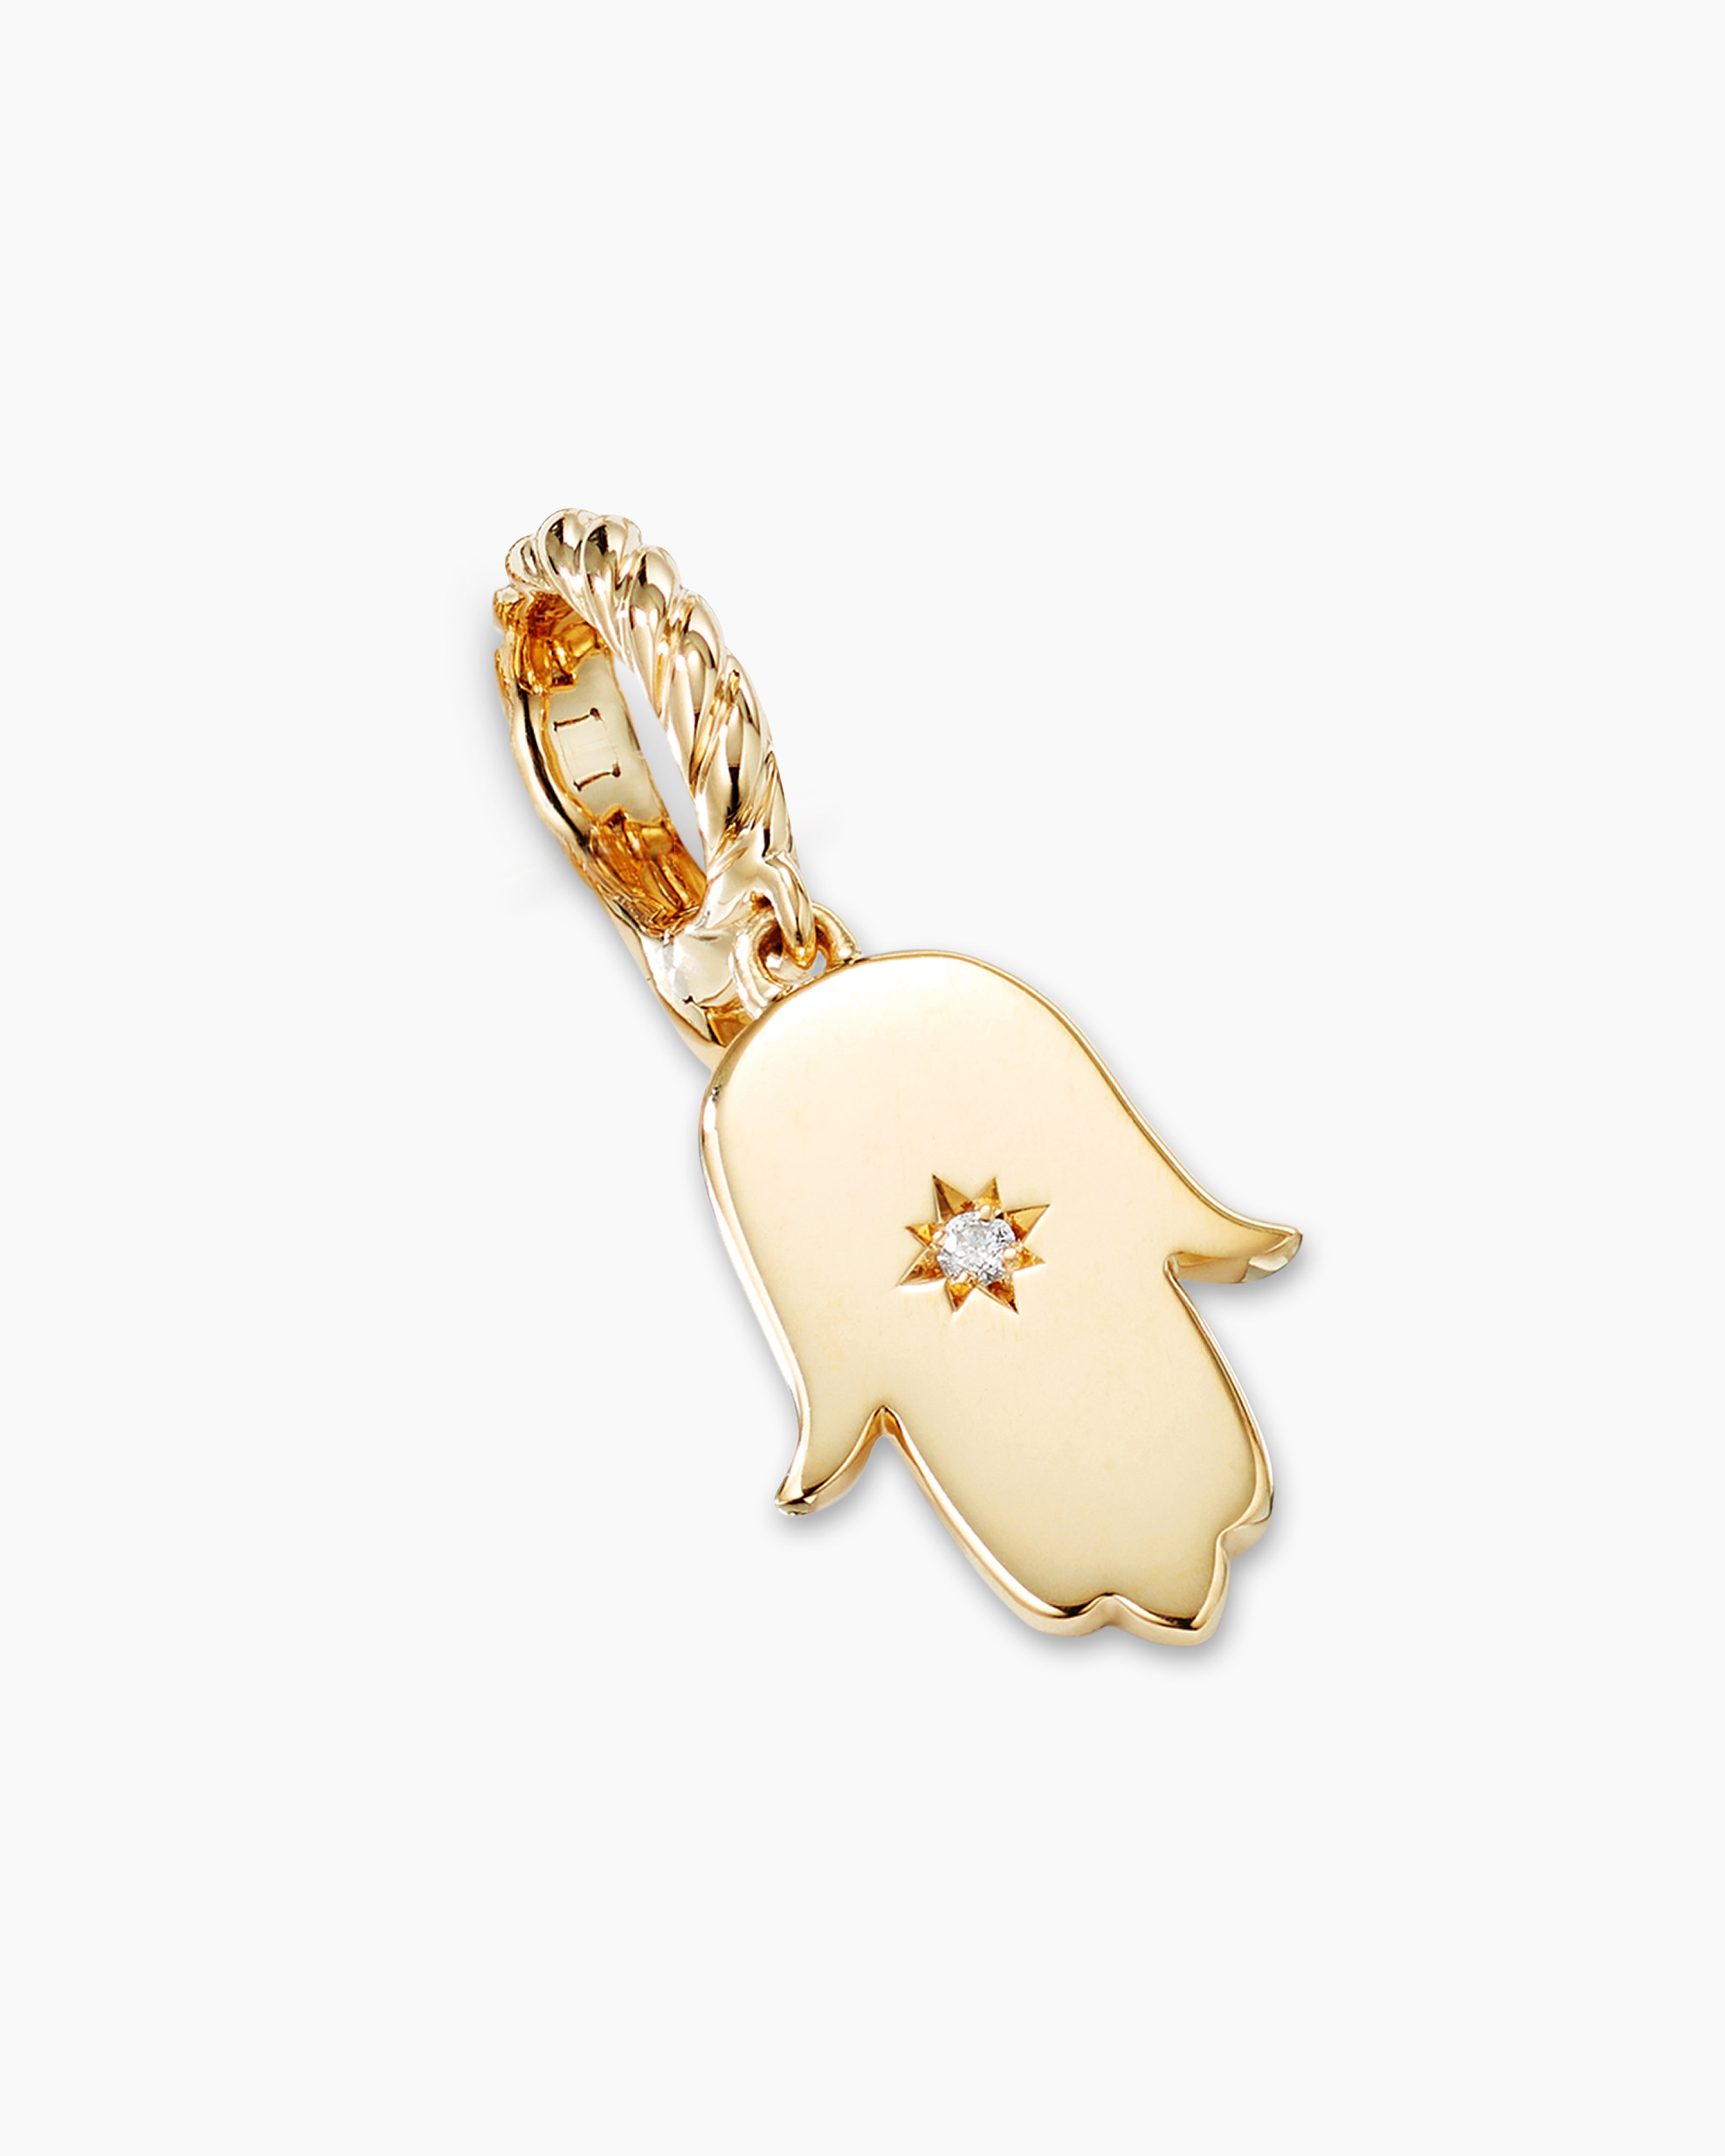 Hamsa Amulet in 18K Yellow Gold with Center Diamond, 15.8mm